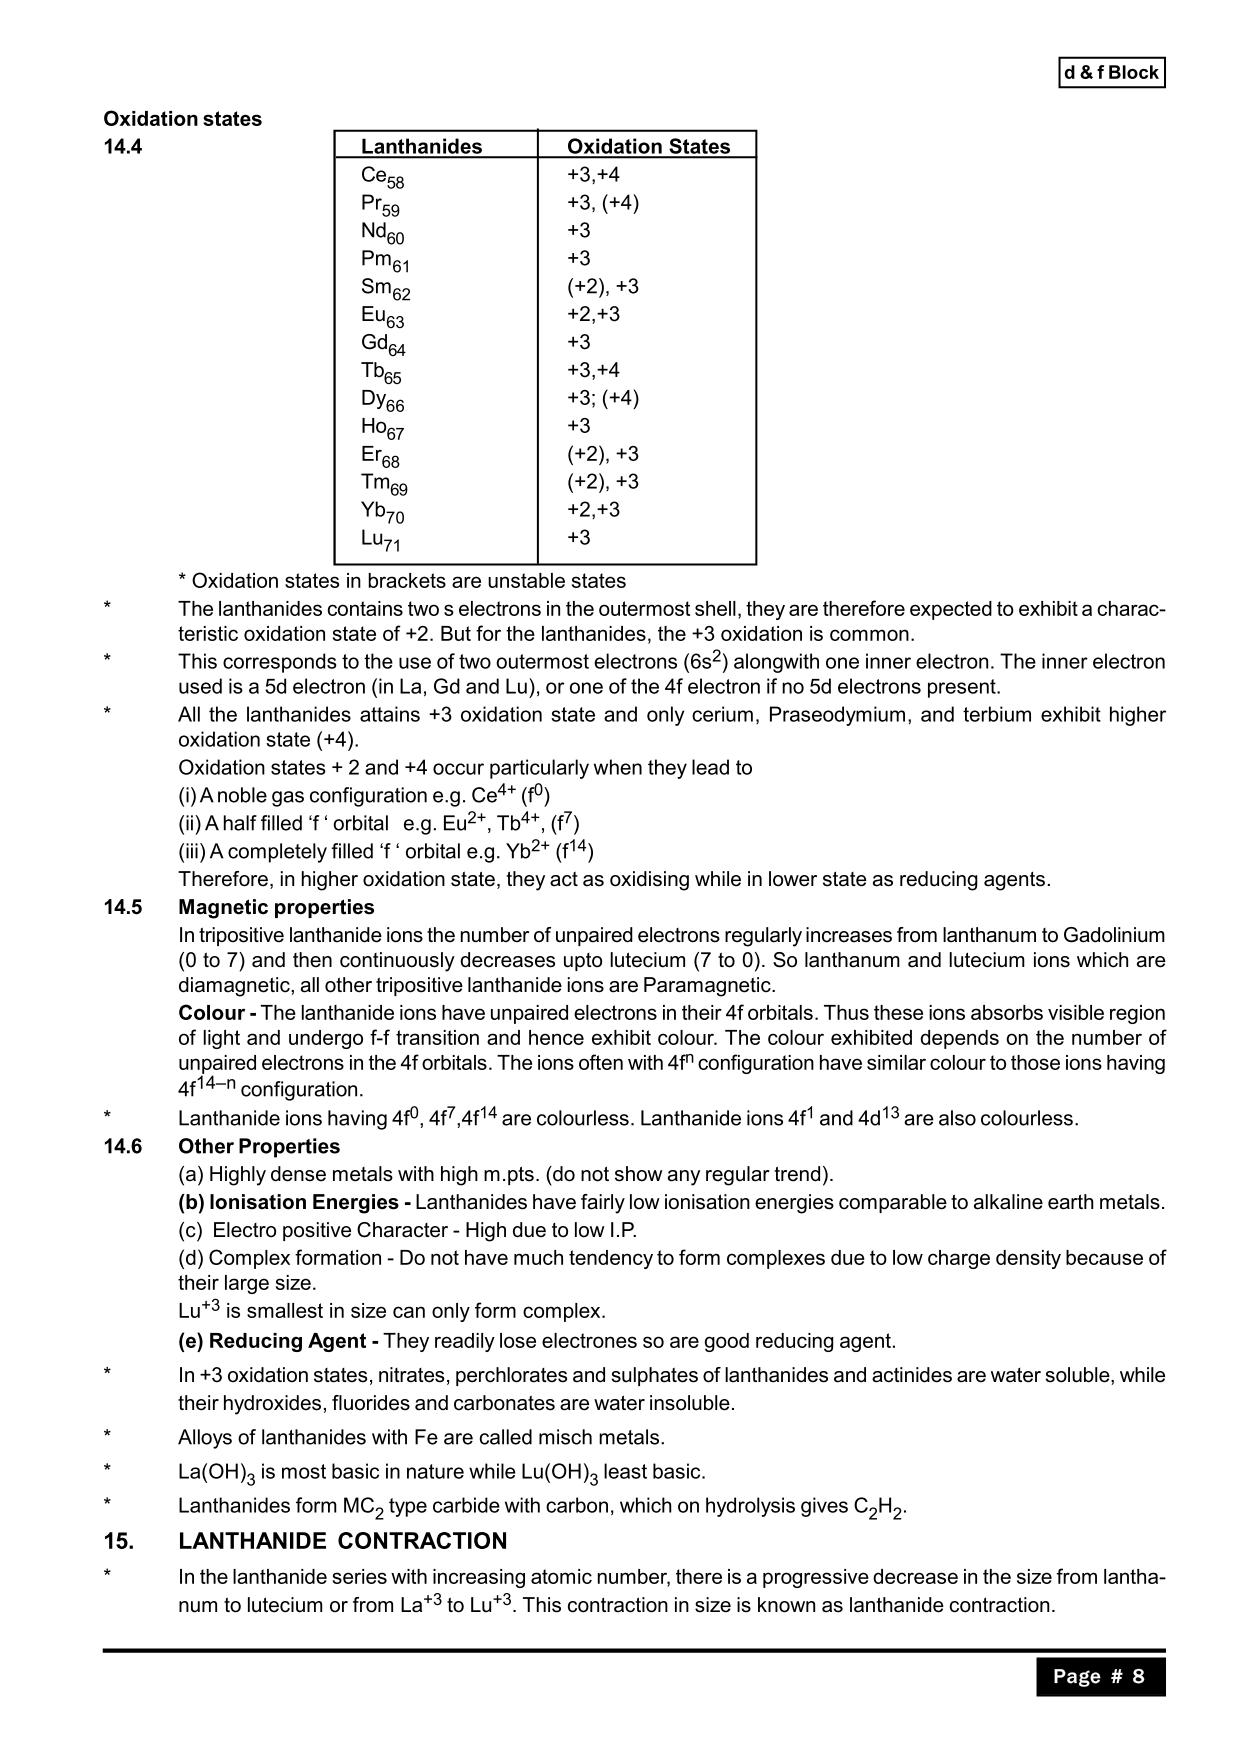 D and F Block Elements Class 12 Notes: Lanthanide Contraction